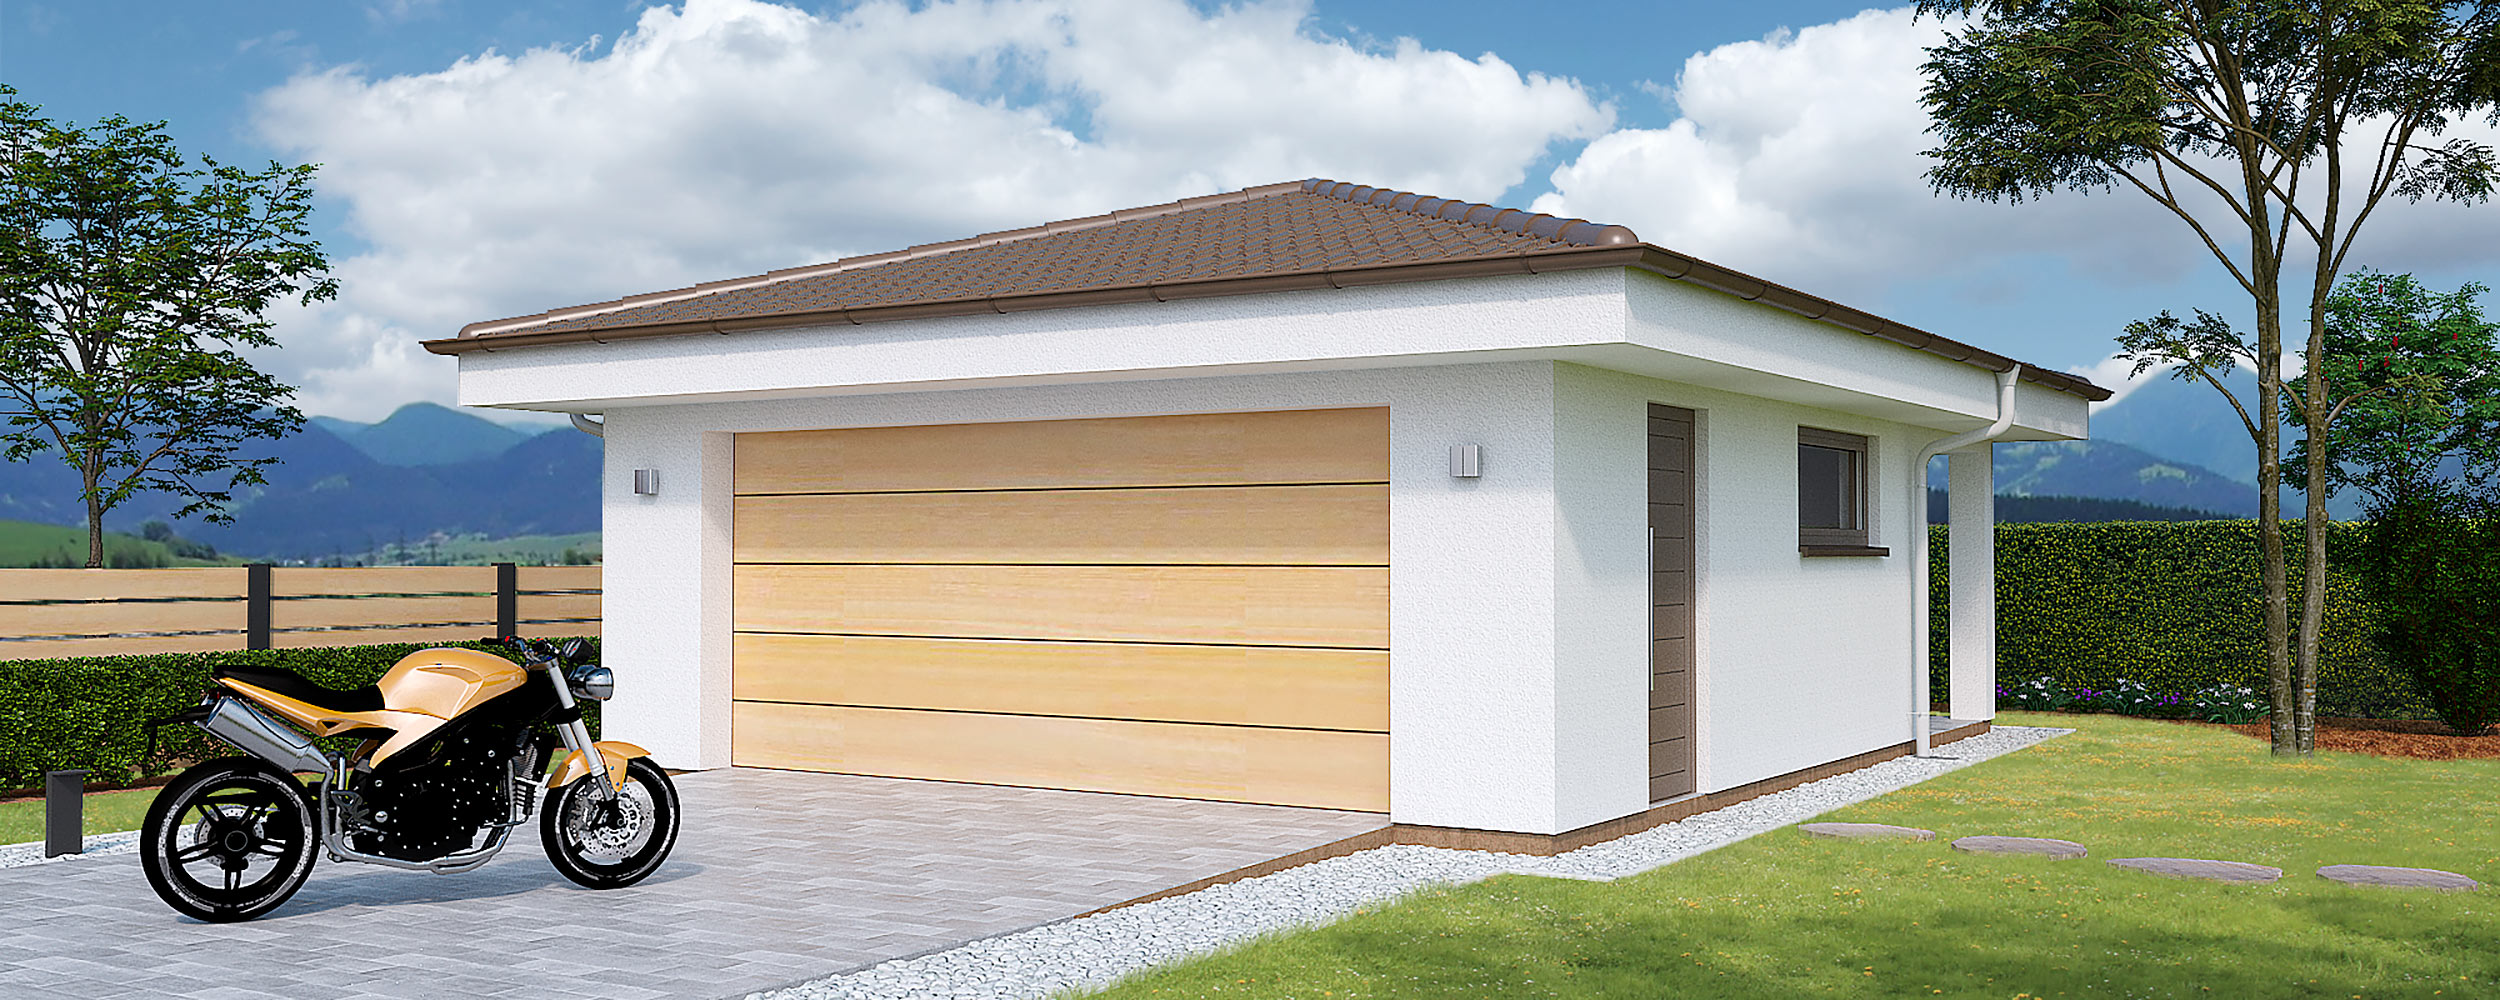 Double garage with back storage